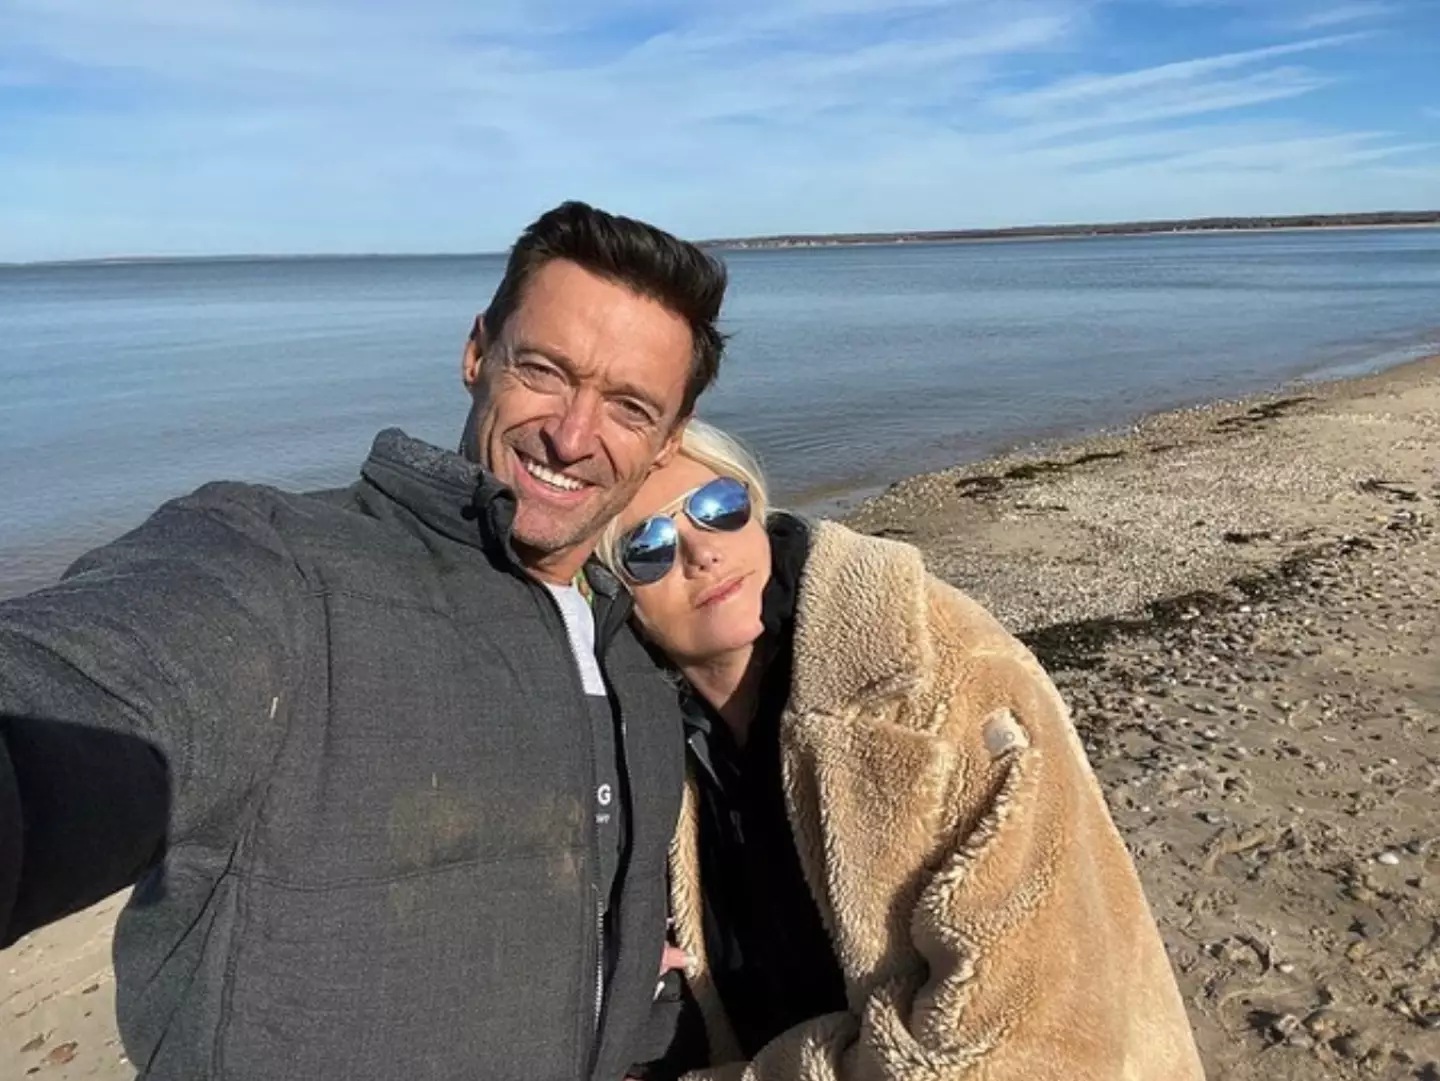 Hugh Jackman and his wife have been together for 26 years.